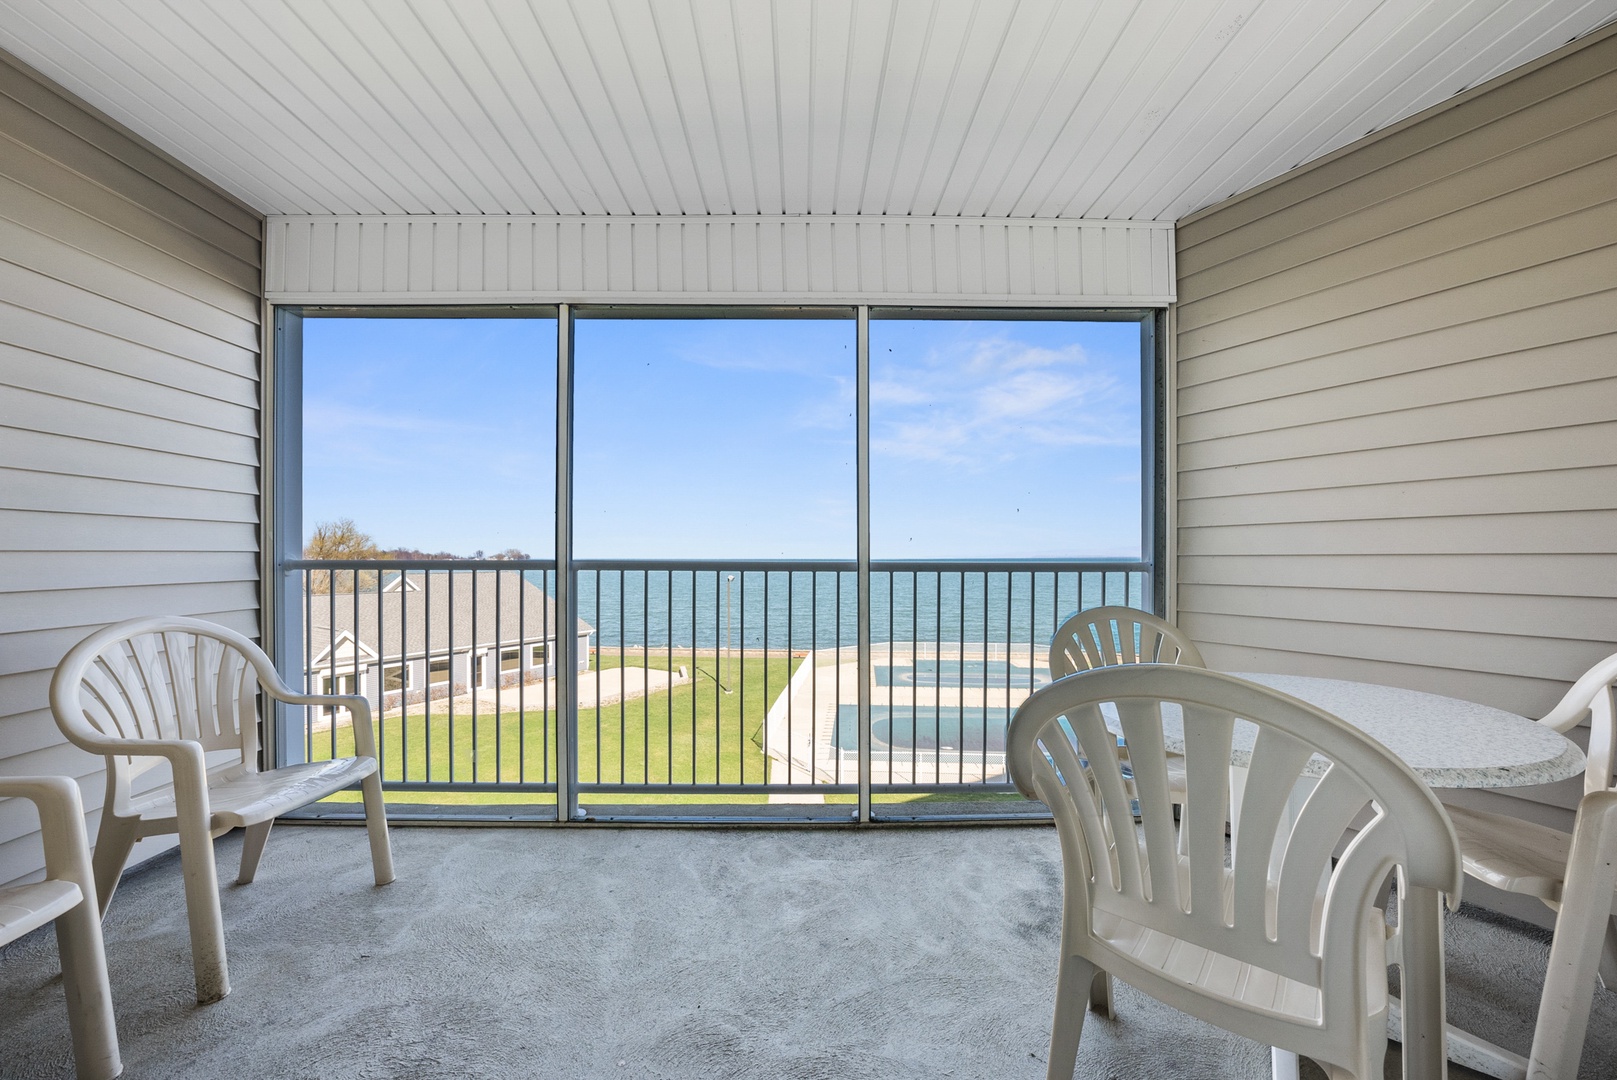 Escape to a serene lakefront retreat with a private balcony